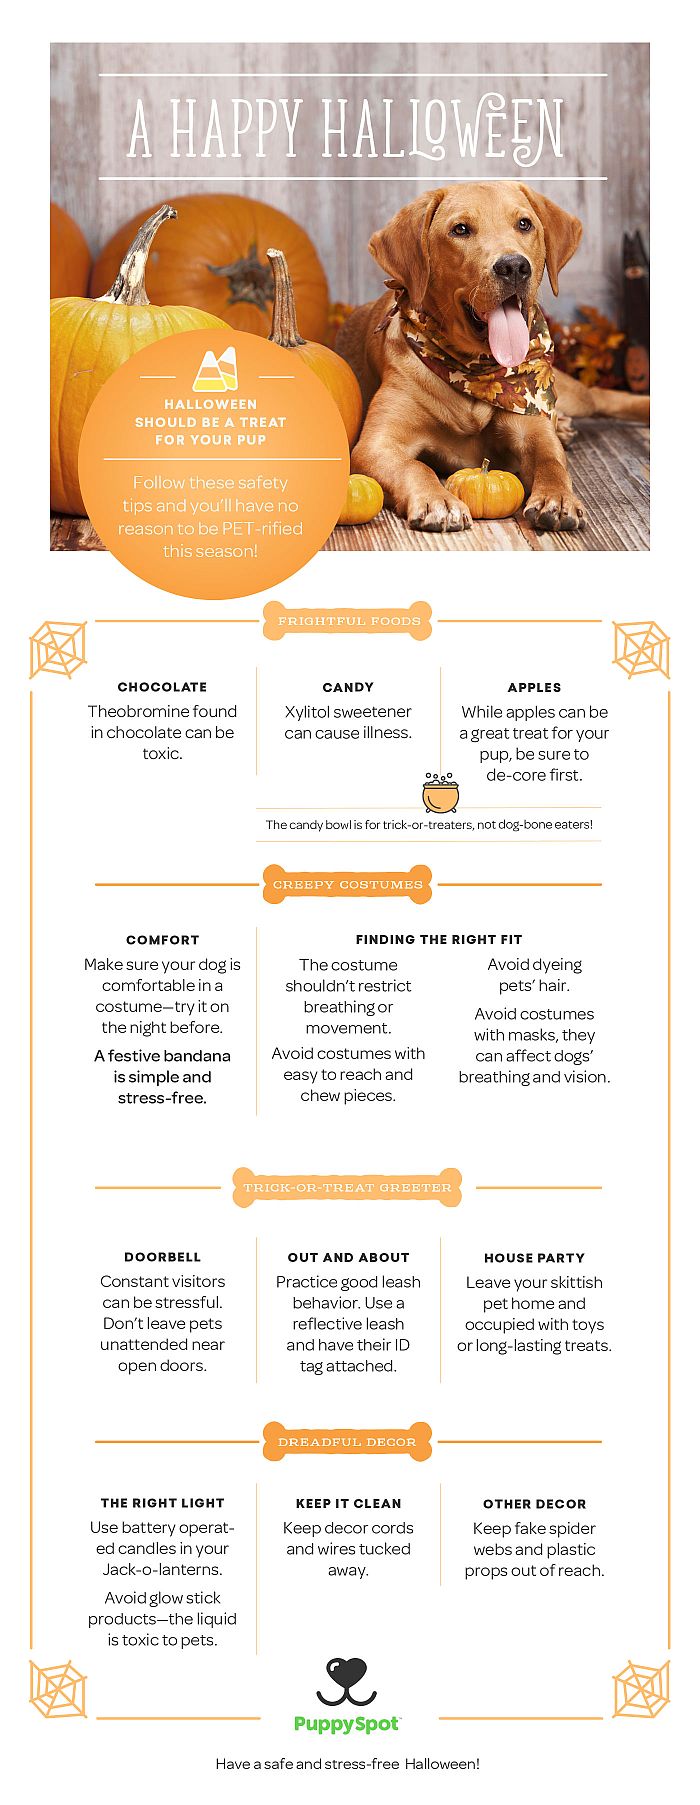 Follow these Halloween safety tips for your dog. As a dog-owner, it is your responsibility to make sure your pups are always happy and healthy.